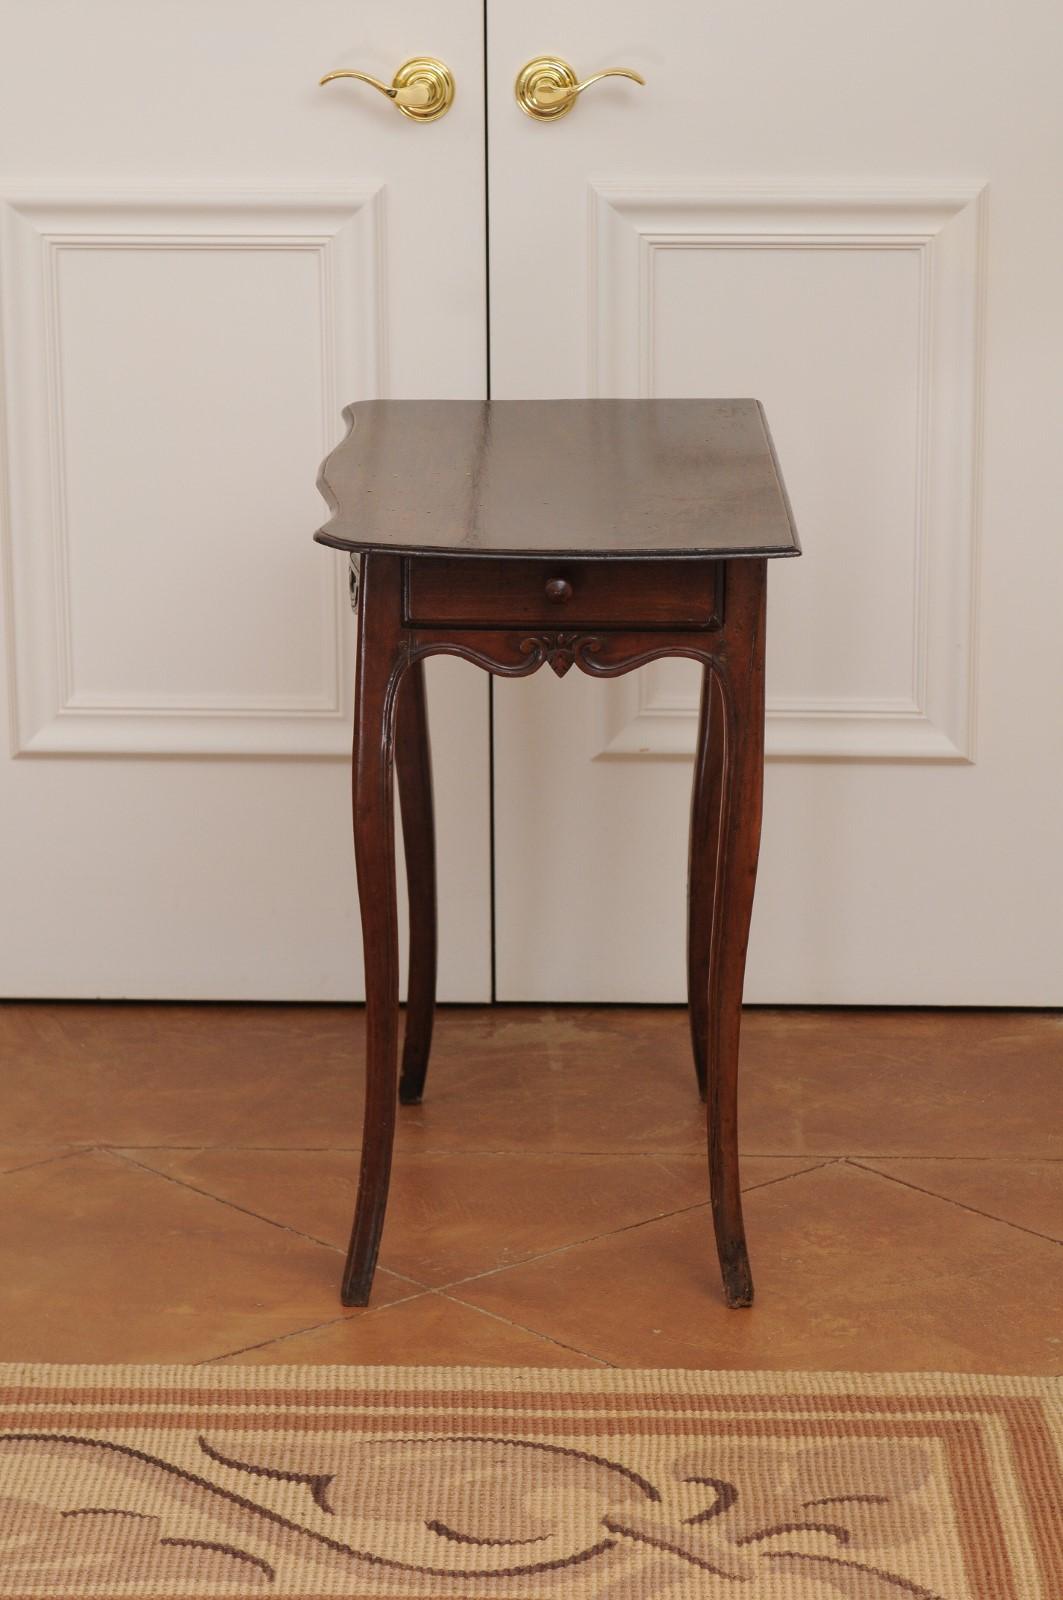 French 1790s Walnut Side Table with Side Drawer, Curving Legs and Carved Apron For Sale 6